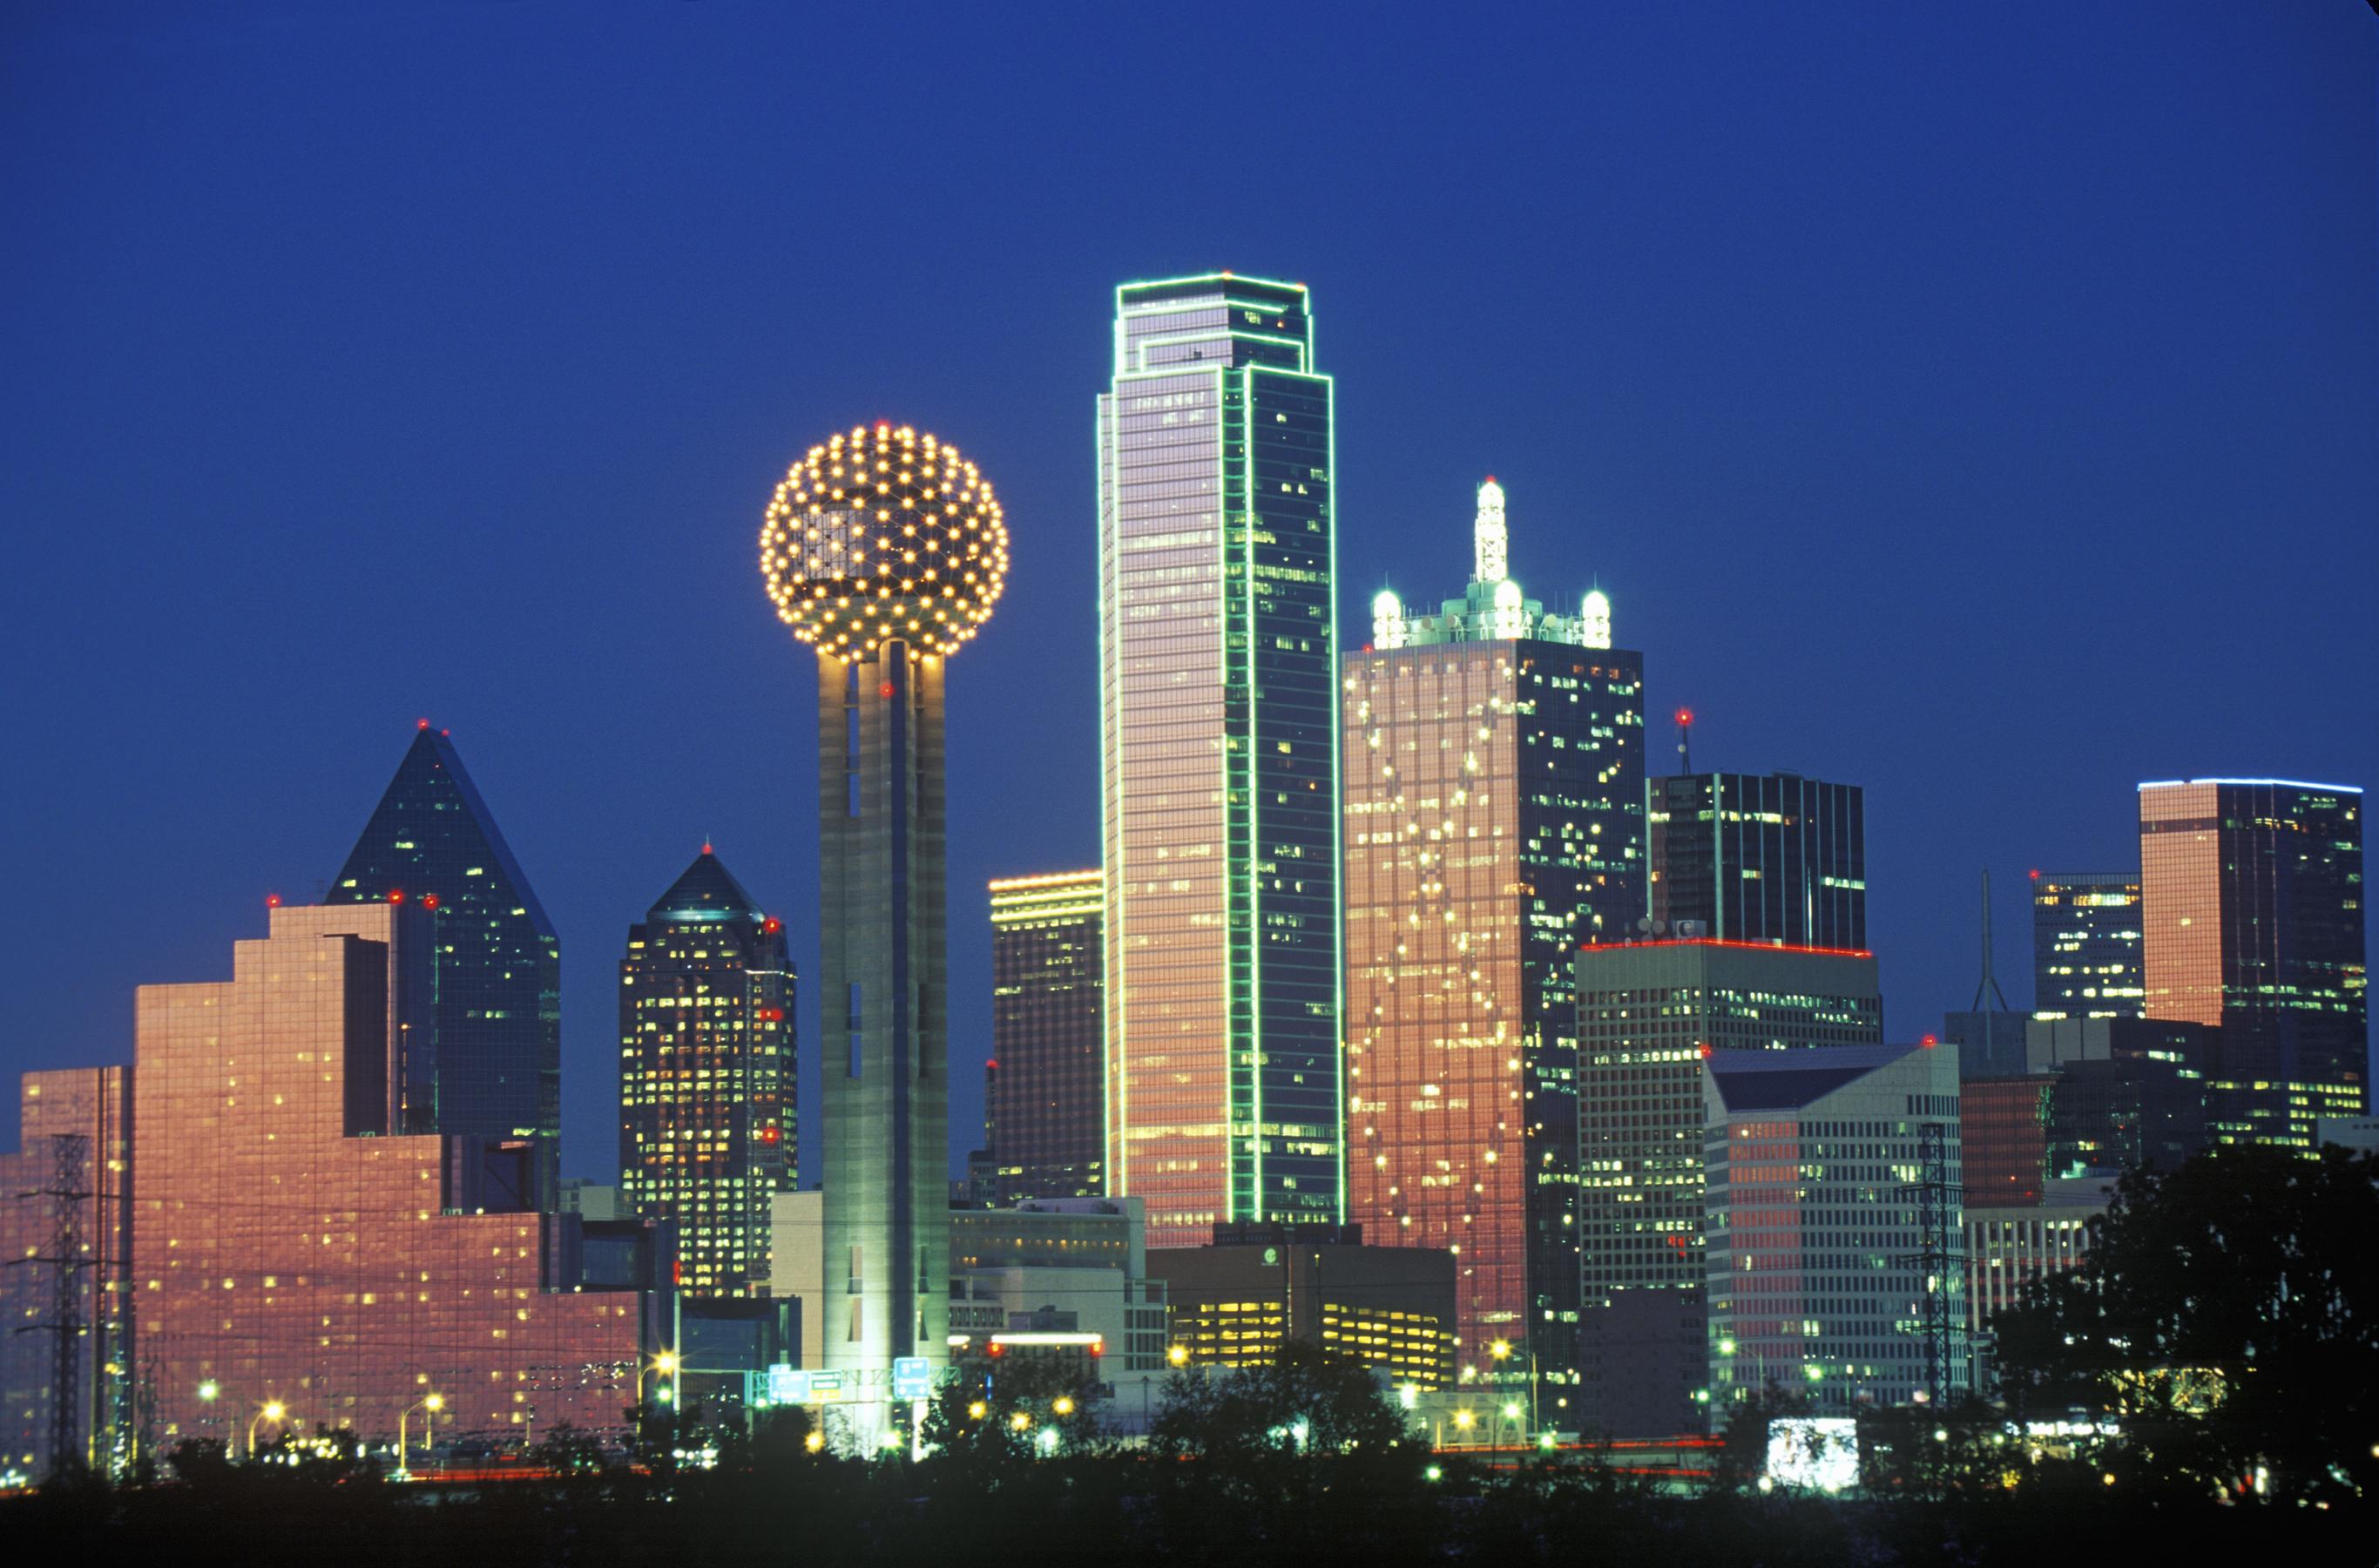 Hotels in Dallas and Fort Worth | Fodor’s Travel